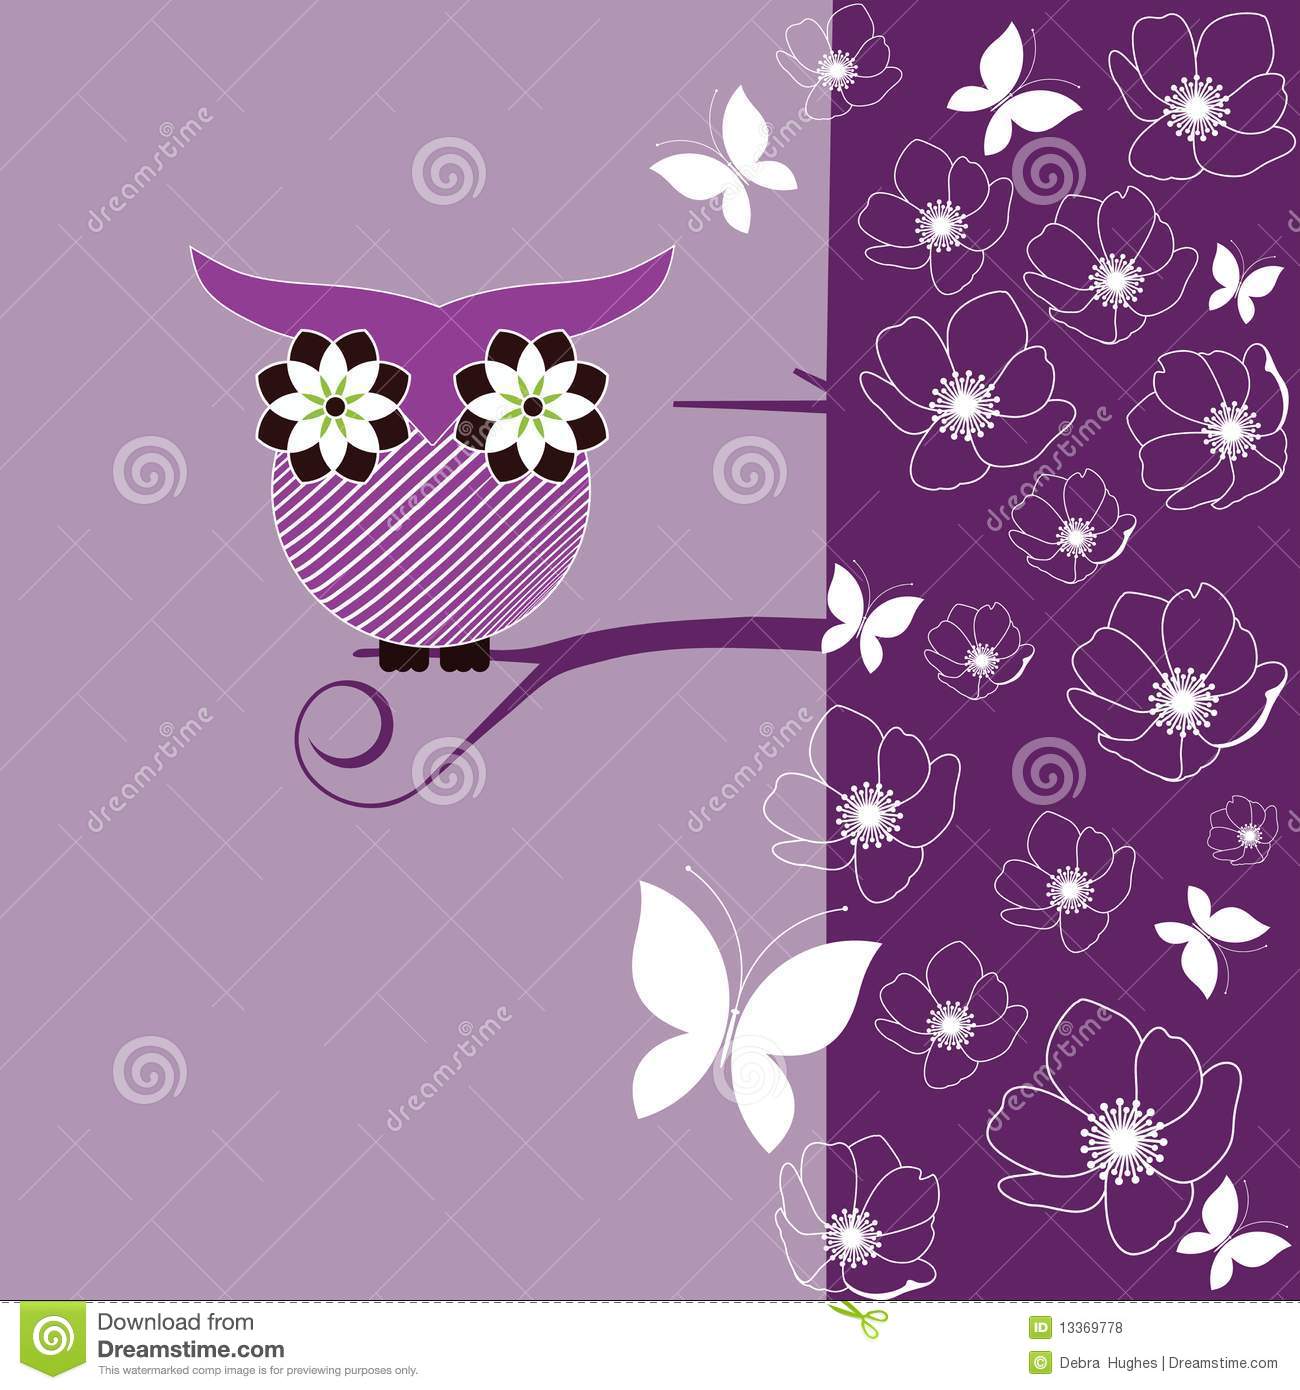 Whimsical Owl Sitting On A Branch With Flower Blossoms And Butterflies